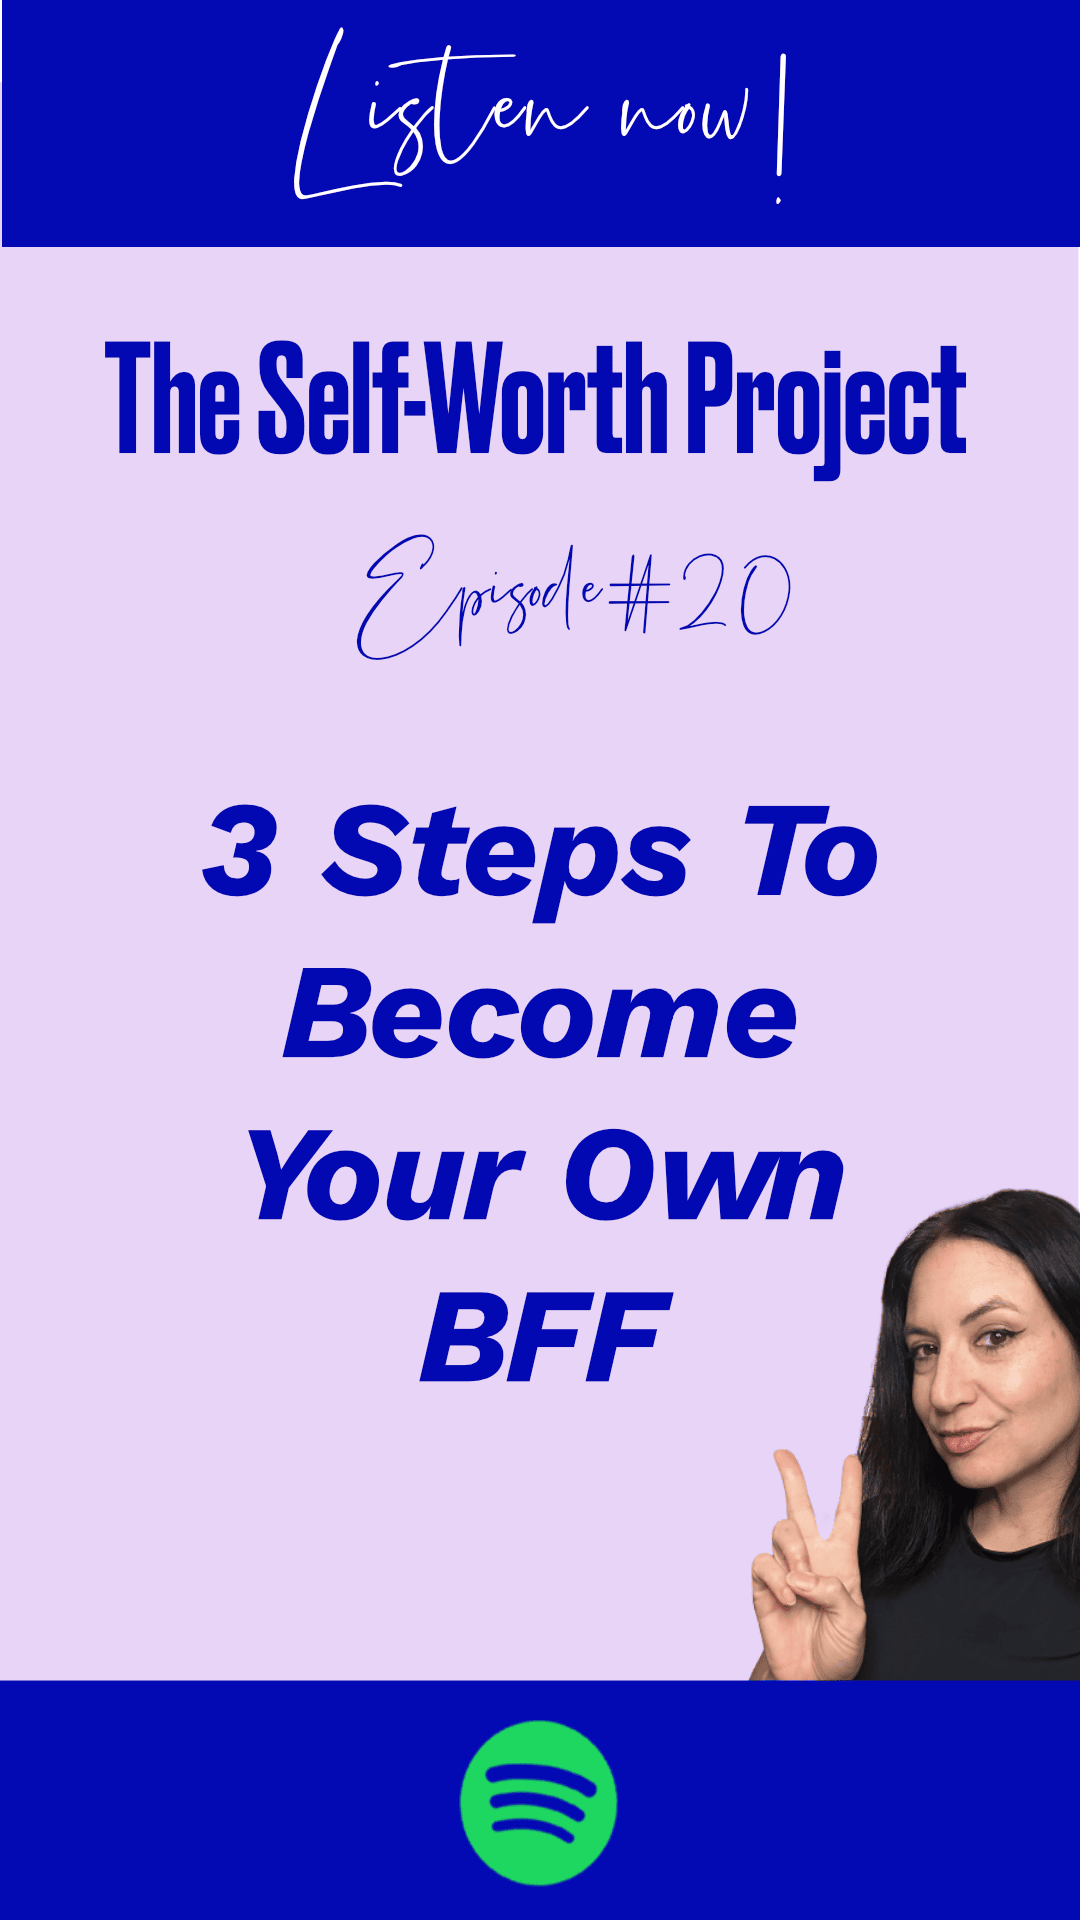 Episode #20: 3 Steps To Become Your Own BFF!